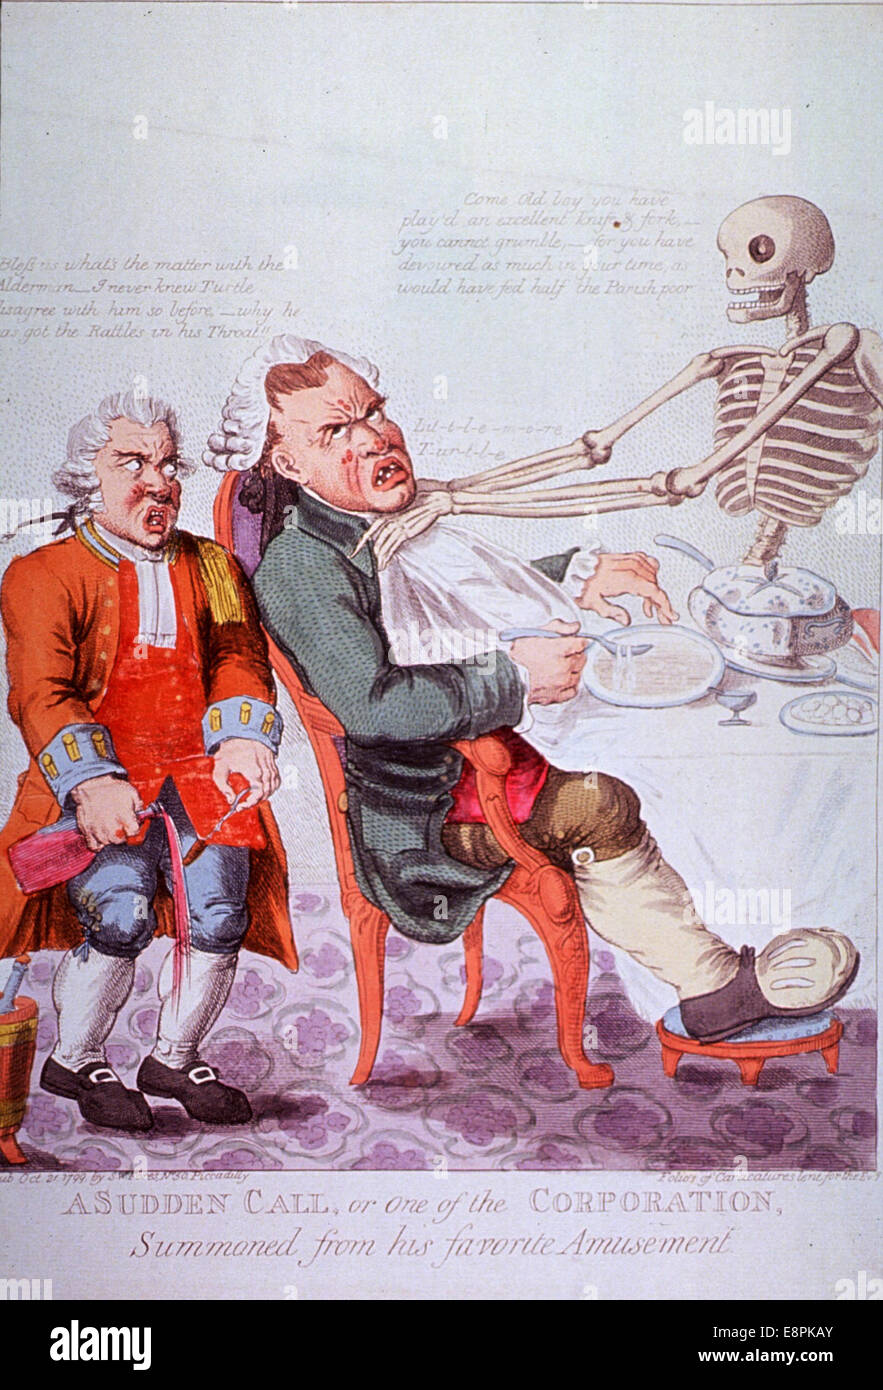 Physical Description: 1 print : engraving, color ; 39 x 29 cm. Image Description: A man with gouty foot is sitting at a table eating; he is being choked by the figure of Death, who condemns him for his gluttony; another man, a servant, stands to the left, Stock Photo